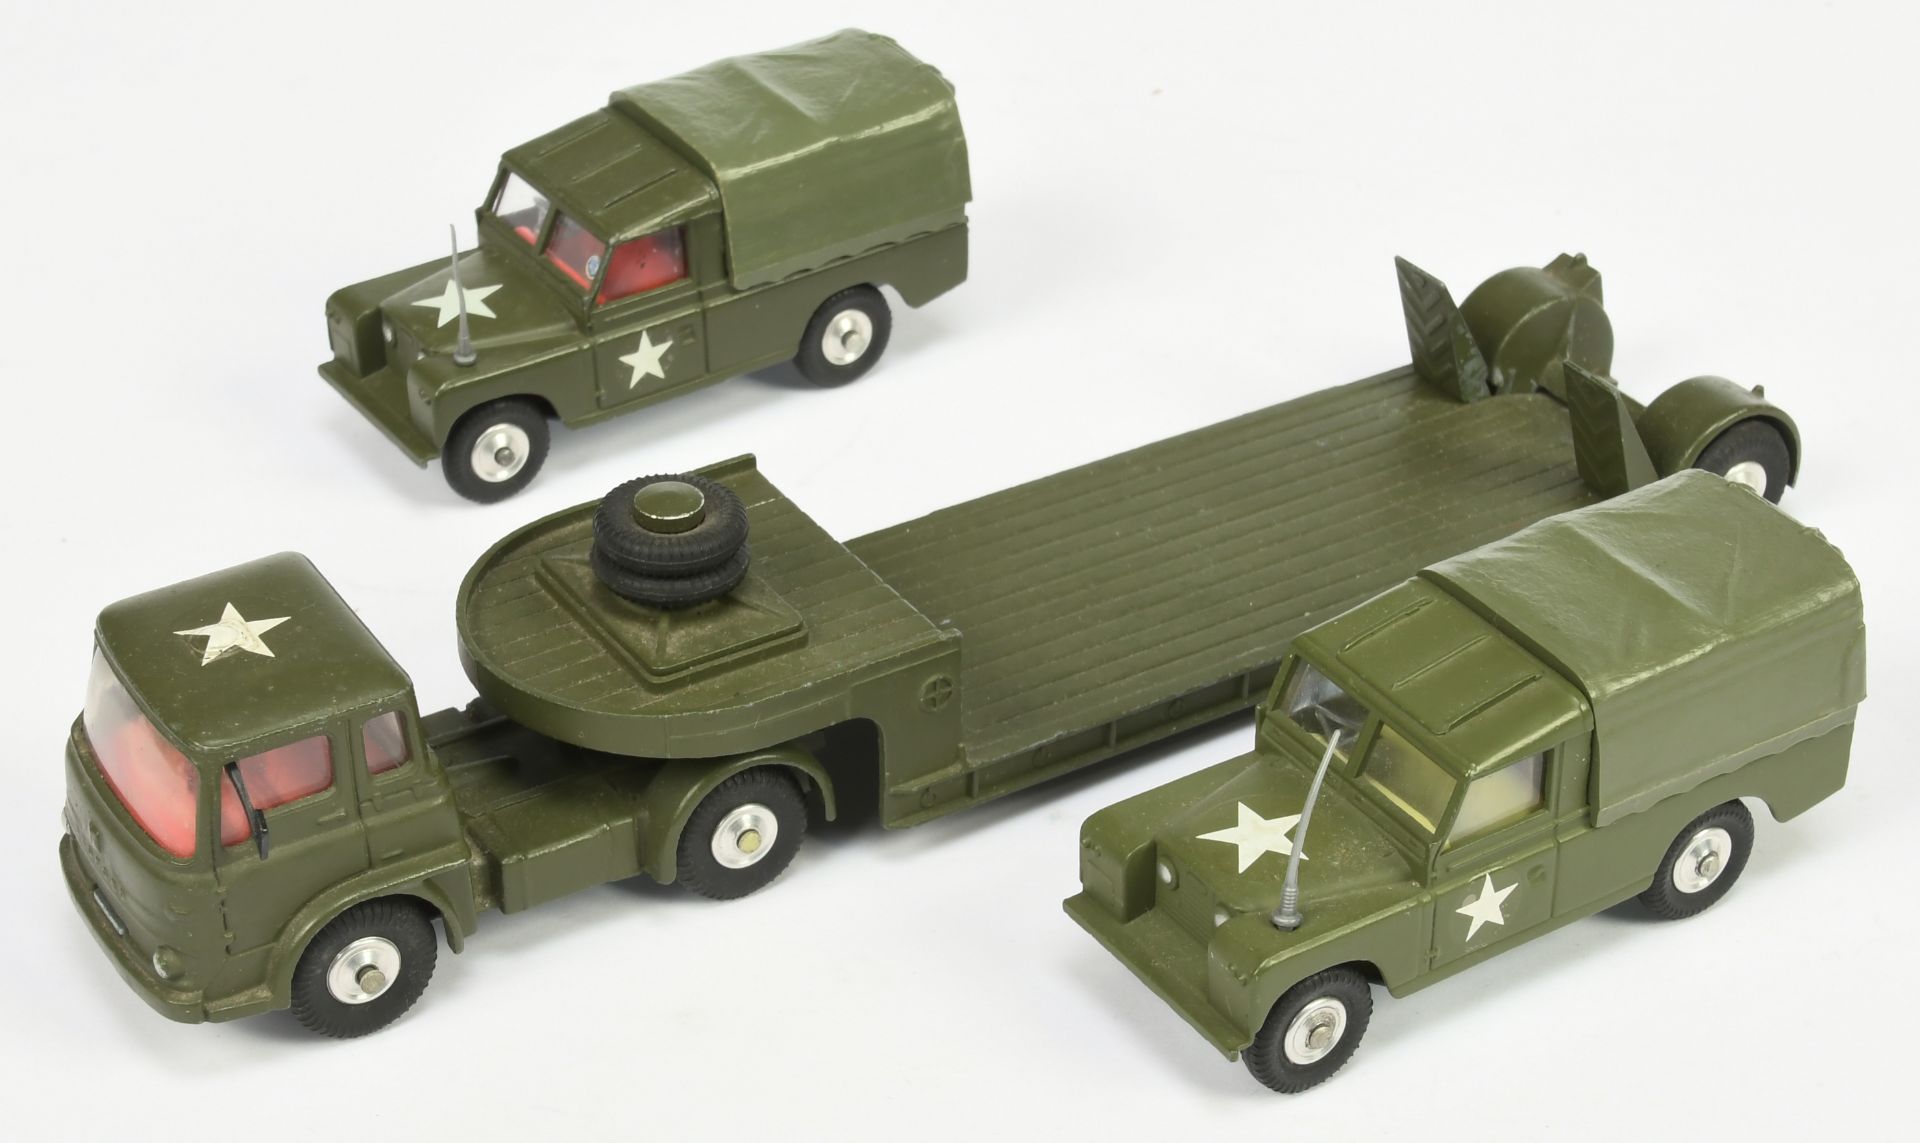 Corgi Toys Unboxed  Group Of Military To Include  - Land Rover - Green including canopy, lemon in...